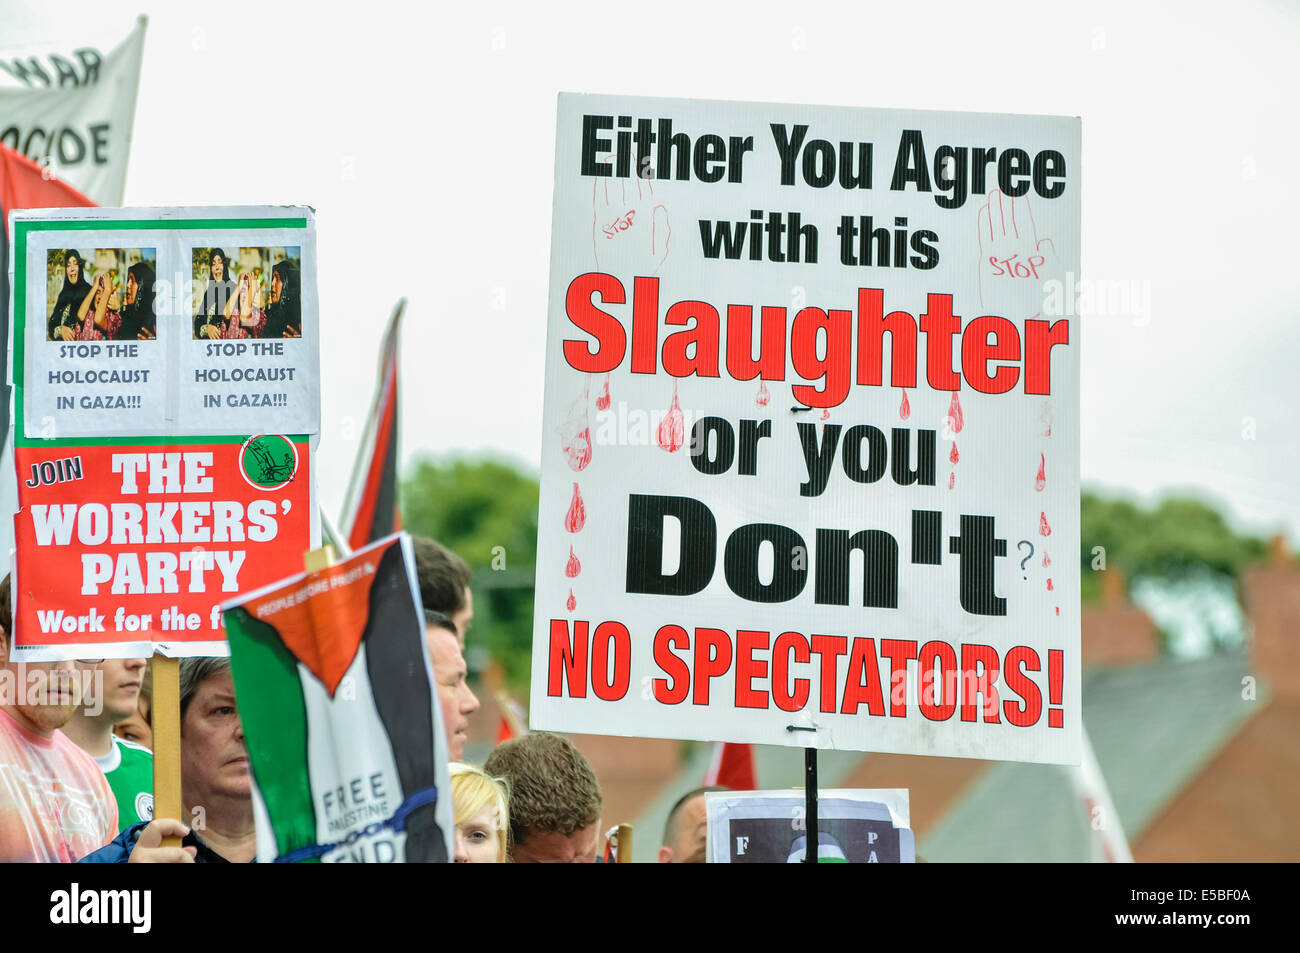 Belfast, Northern Ireland. 26 Jul 2014 - A protester holds up a poster saying 'Either you agree with this slaughter. Or you don't.  No spectators!' at a pro-Gaze/anti-Israeli protest rally Credit:  Stephen Barnes/Alamy Live News Stock Photo